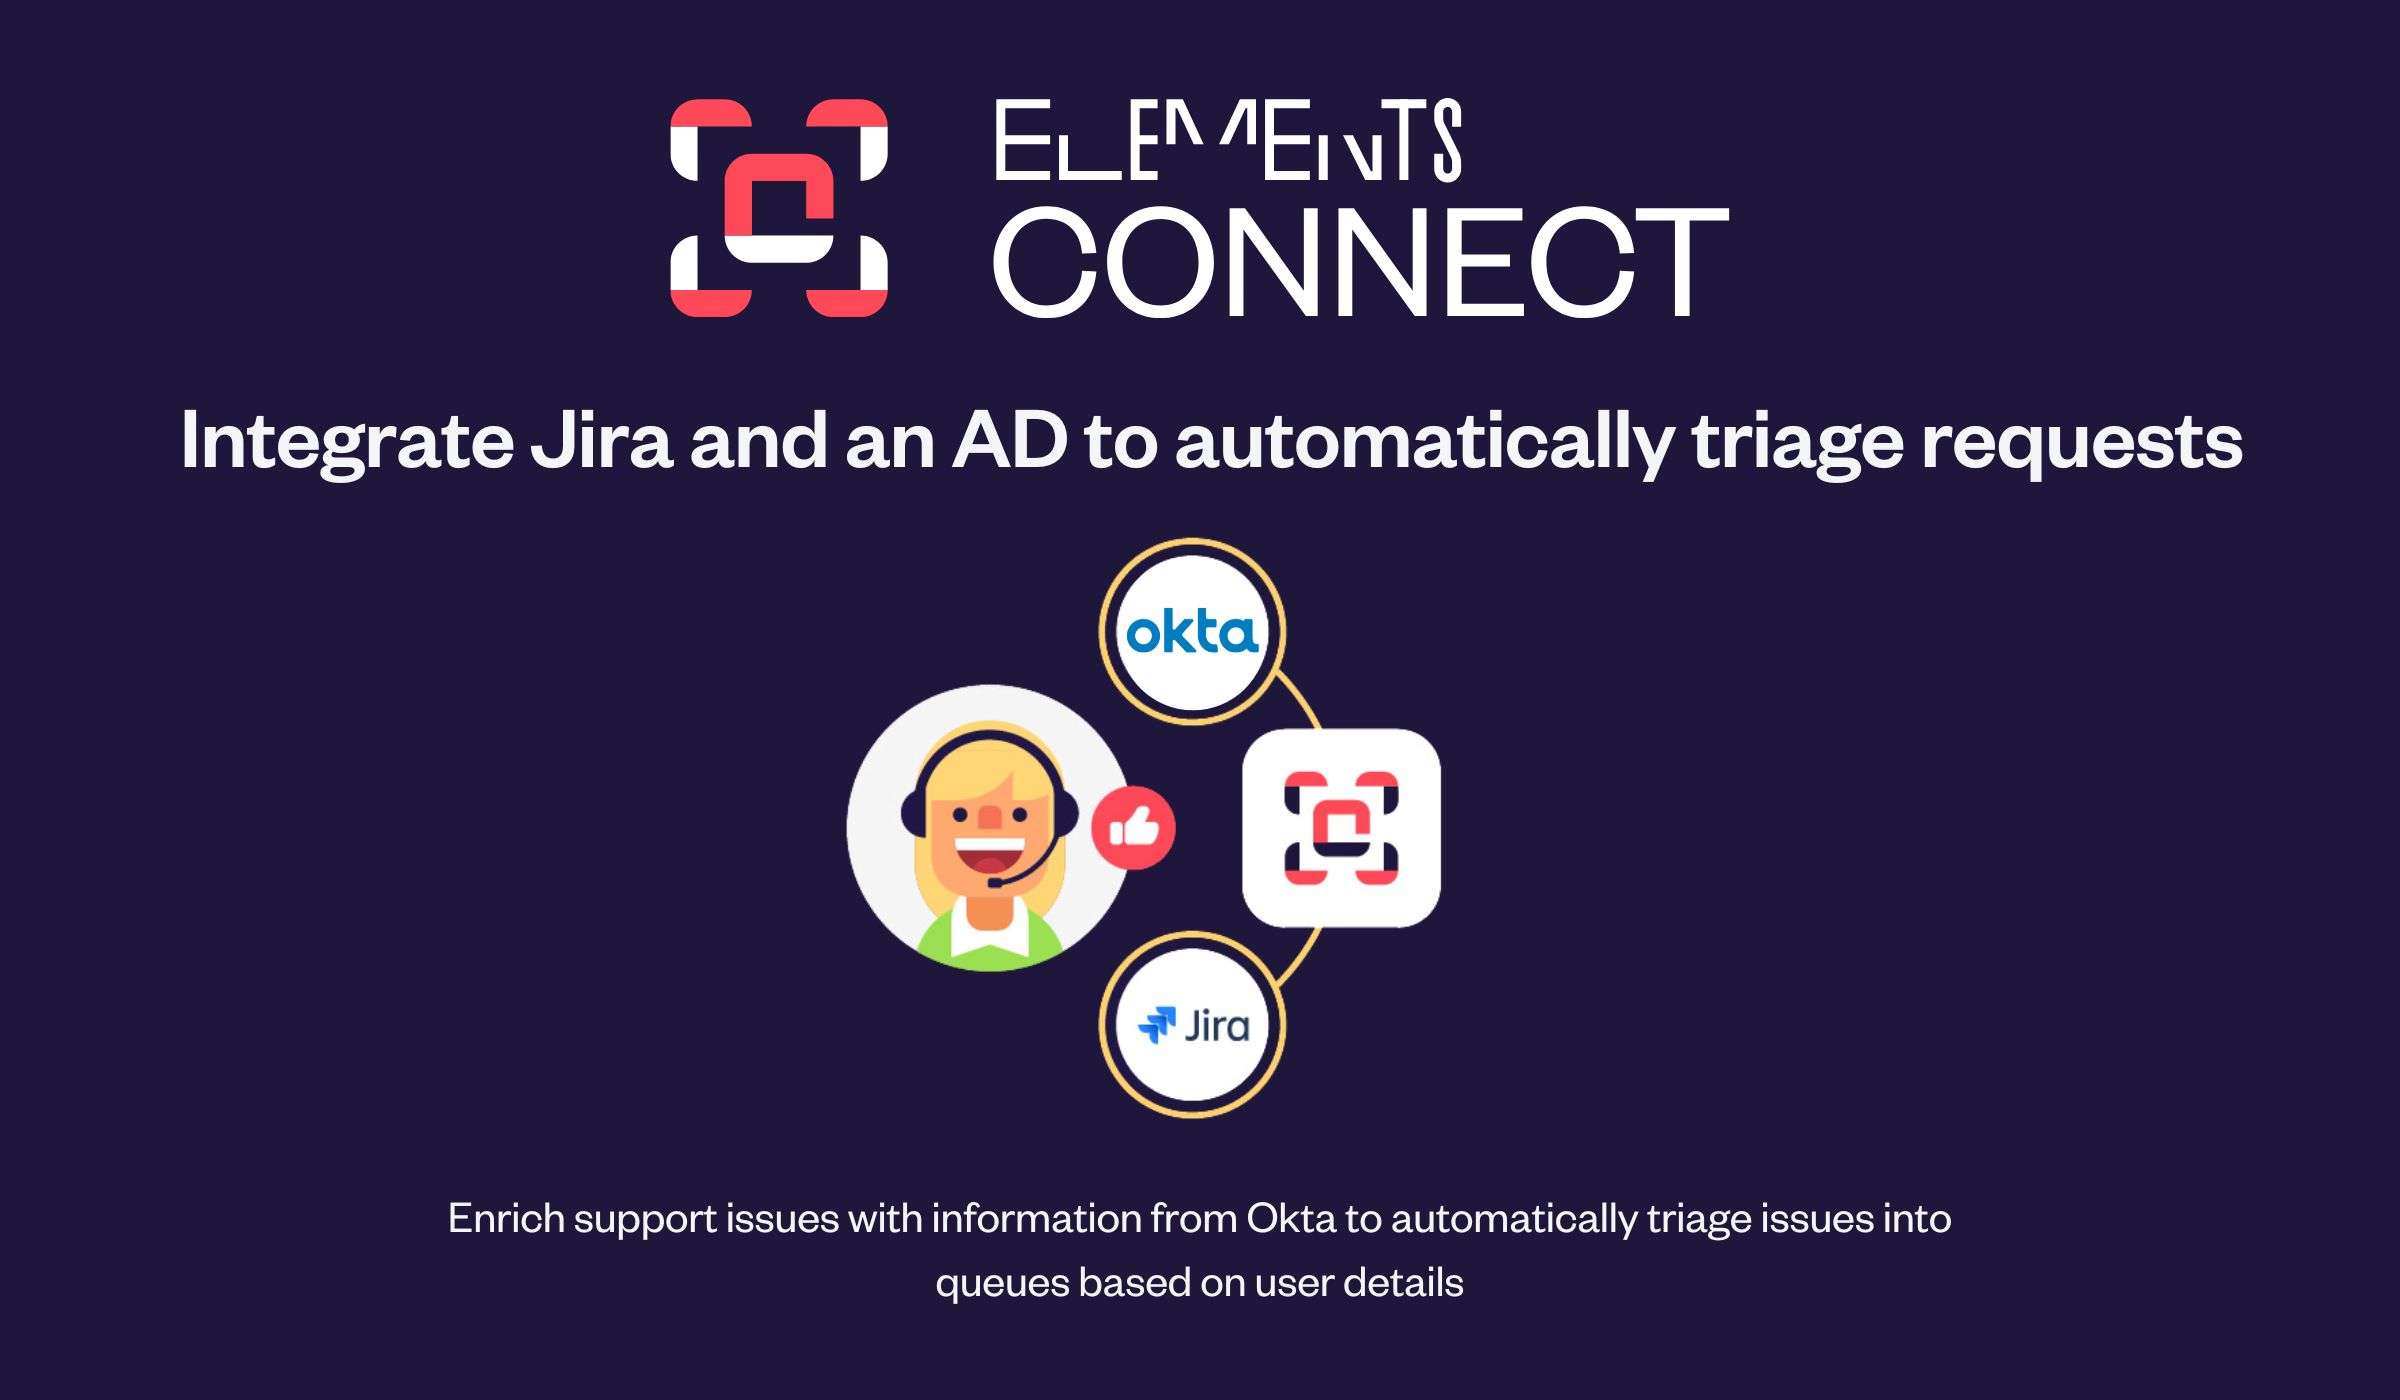 Let's see how Elements Connect can help you bring external data inside Jira issues and provide Jira users with contextualized and up-to-date information, as well as automate tickets triage. In this example, we'll retrieve data directly from an Active Directory.